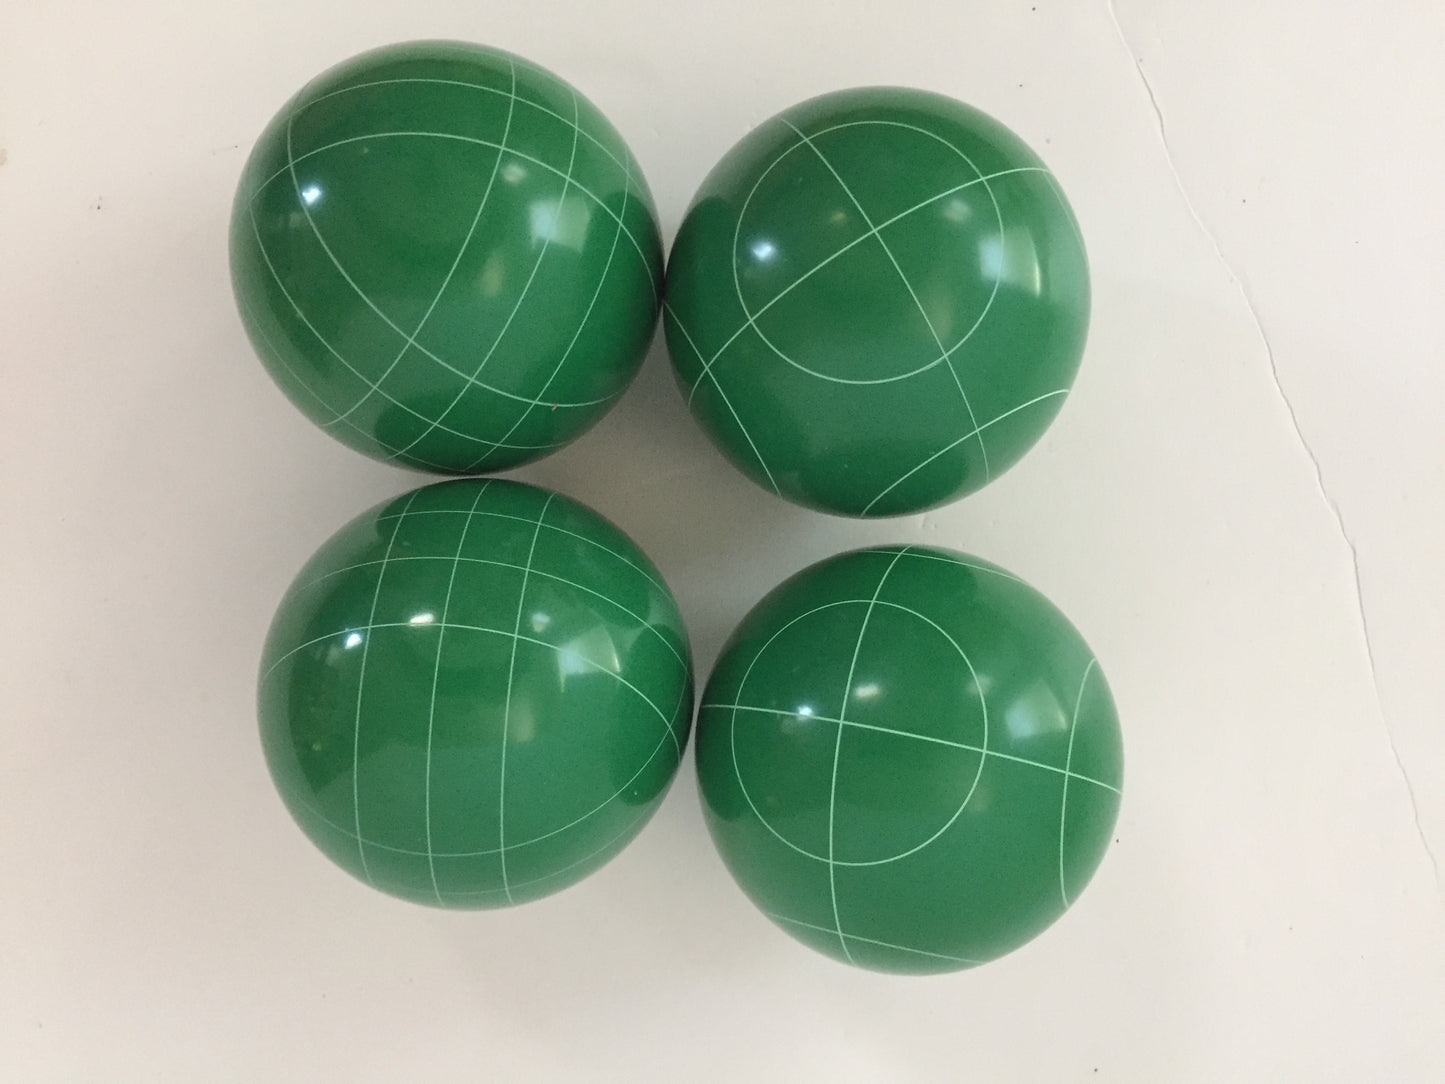 107mm 4 pack Bocce Balls  - Green with 2 different scoring patterns